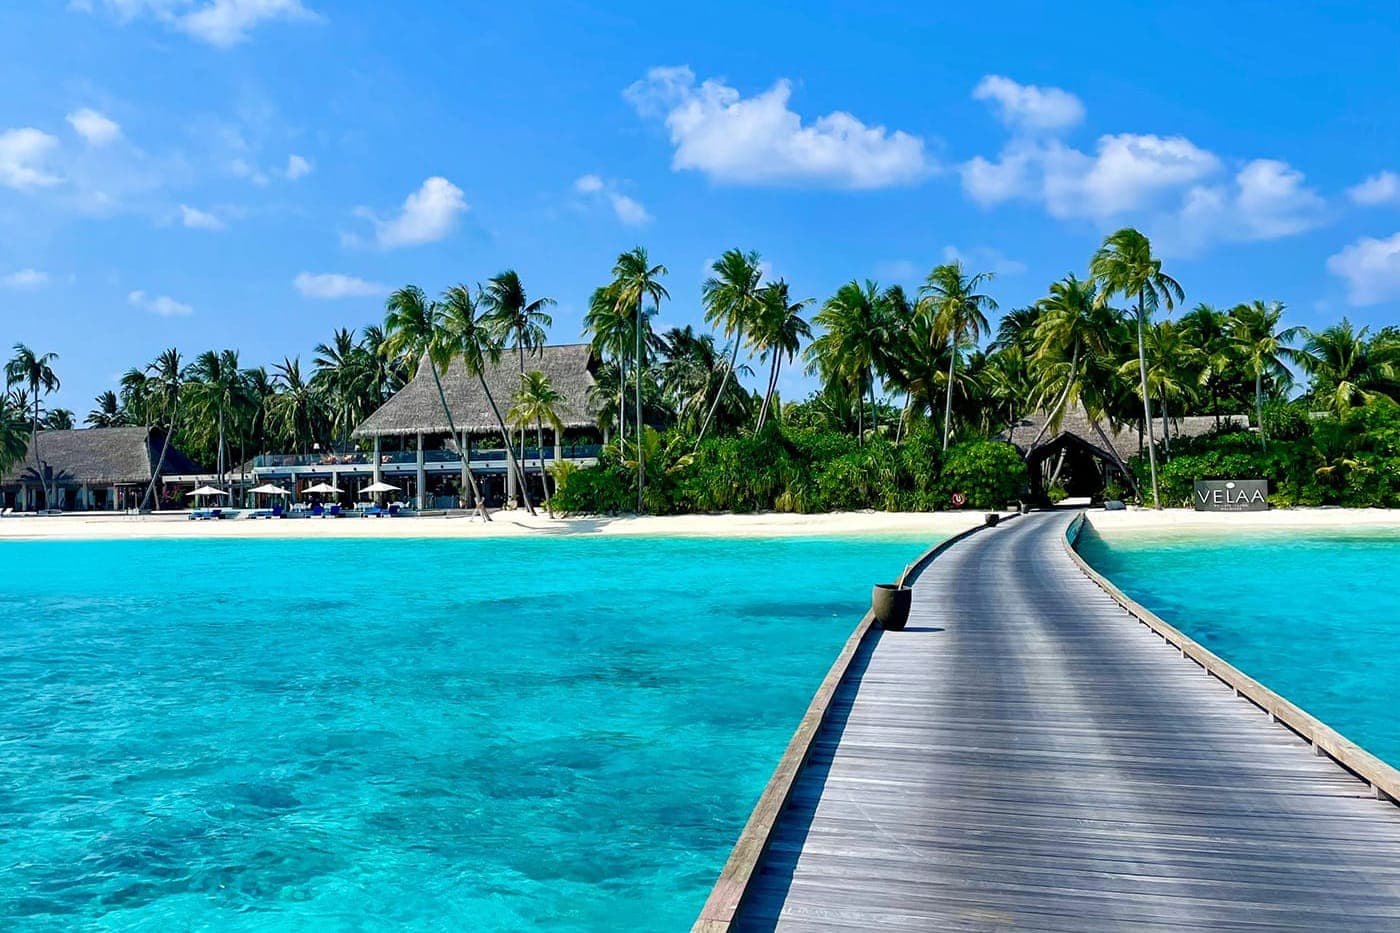 Trip of a lifetime in the Maldives